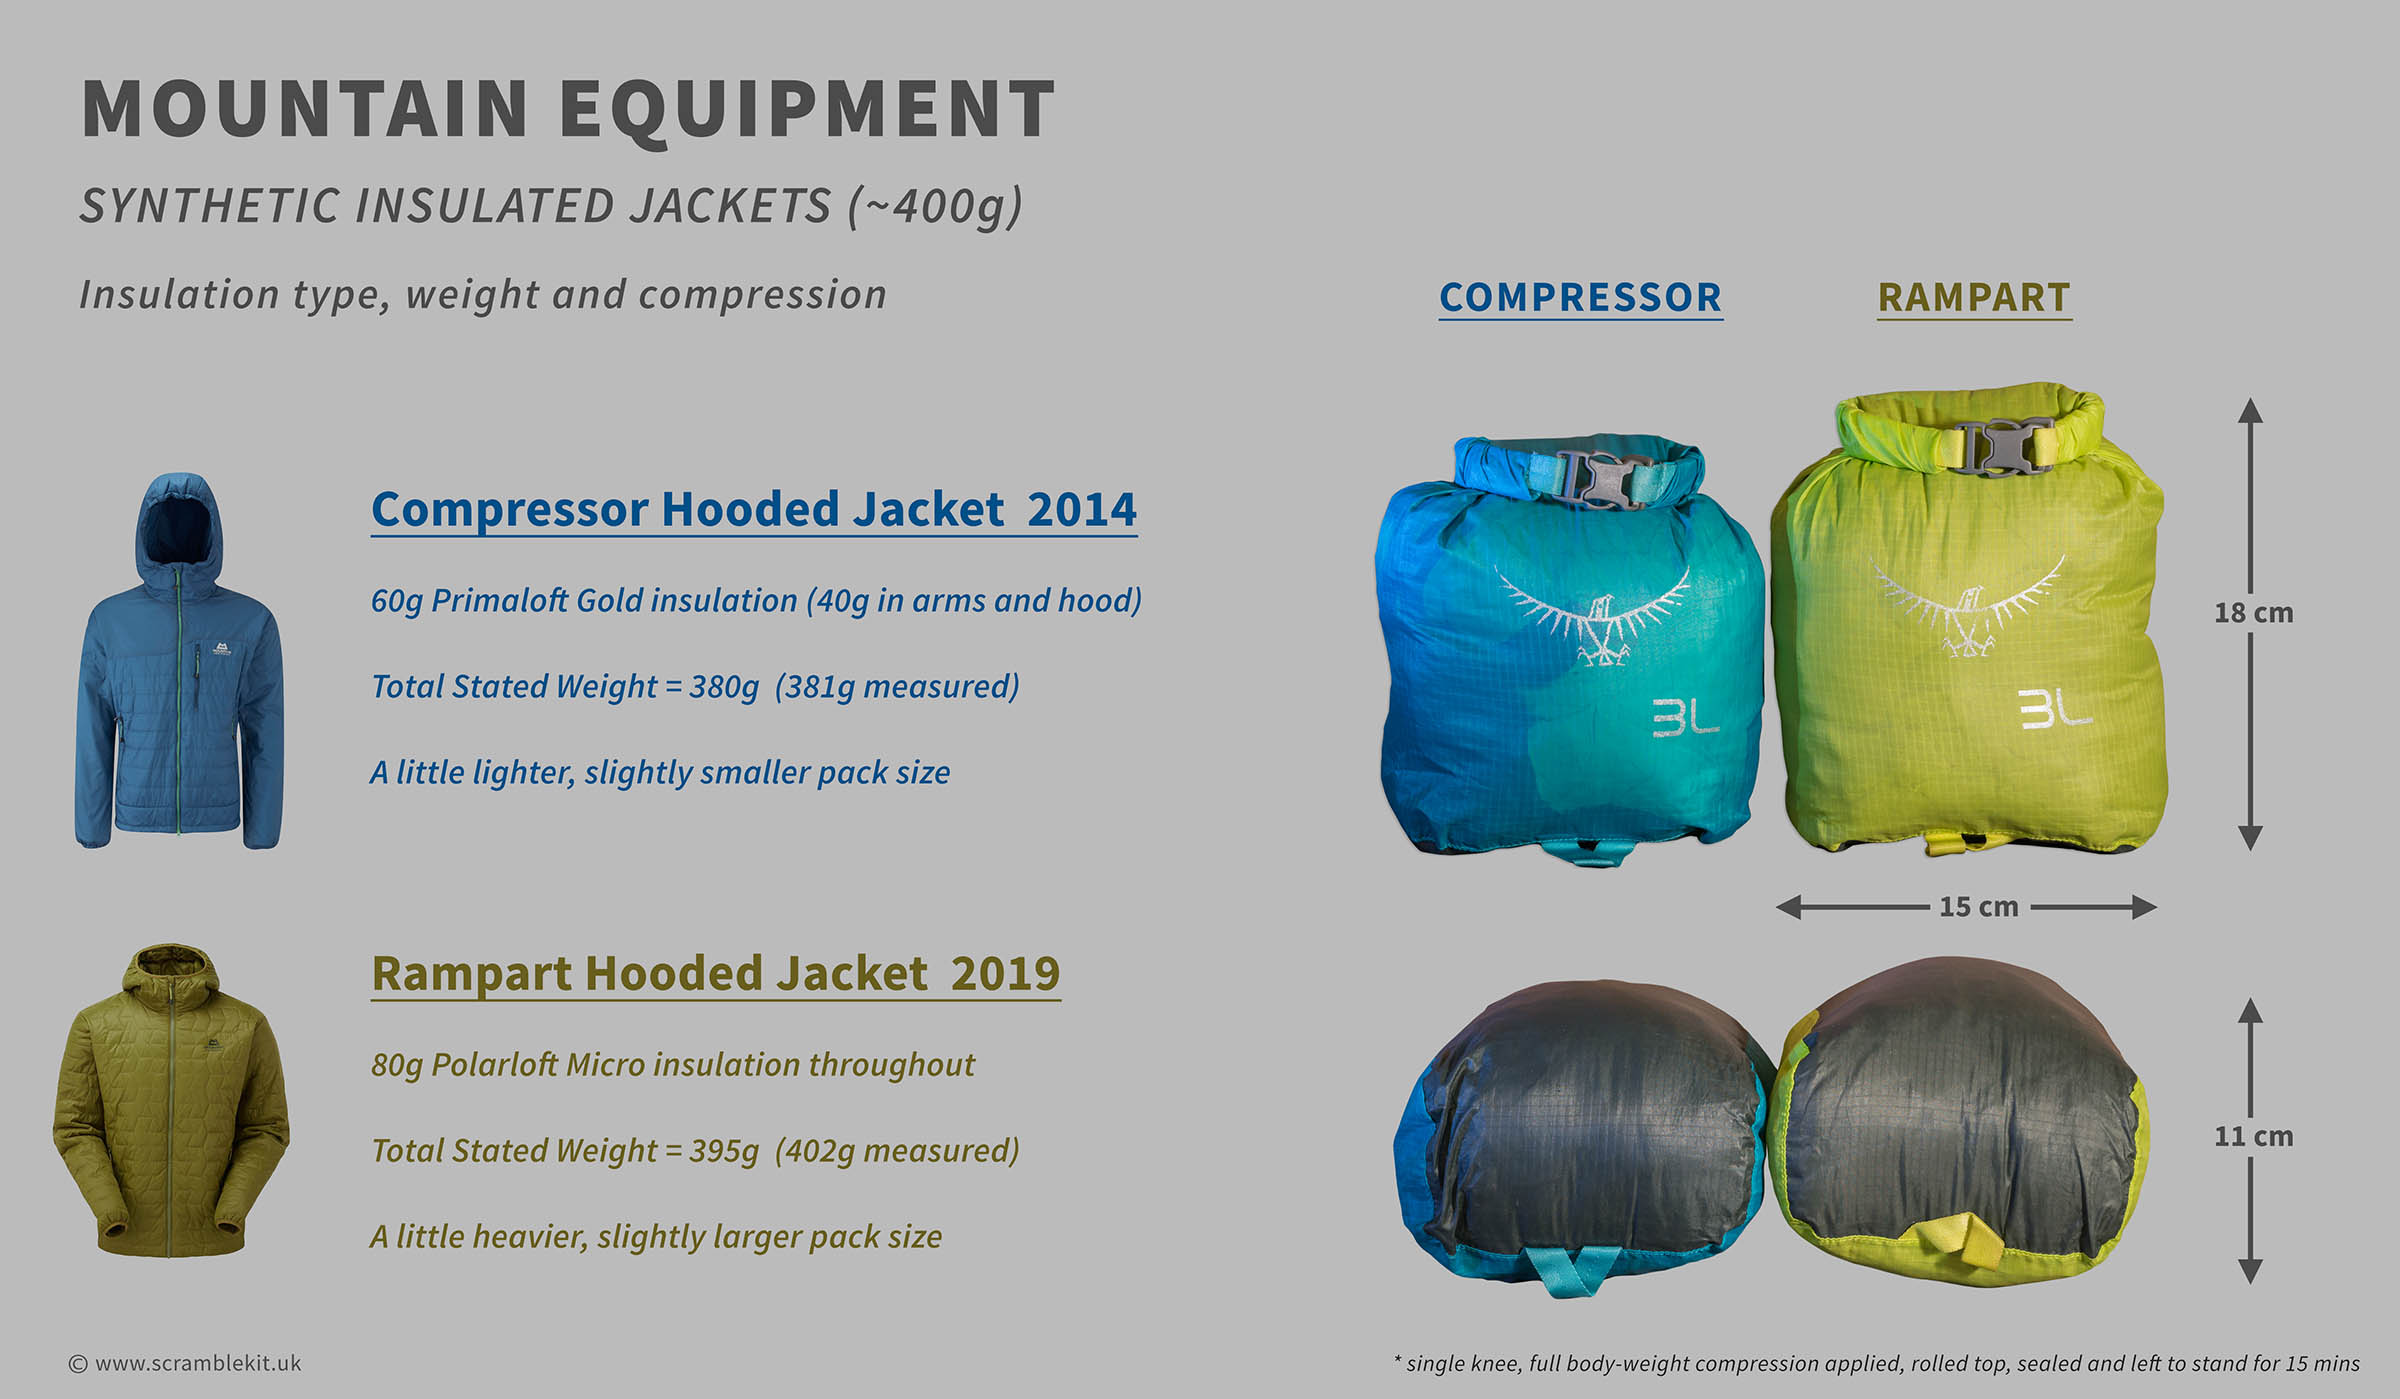 Mountain Equipment's Rampart vs Compressor: Weight and Packsize